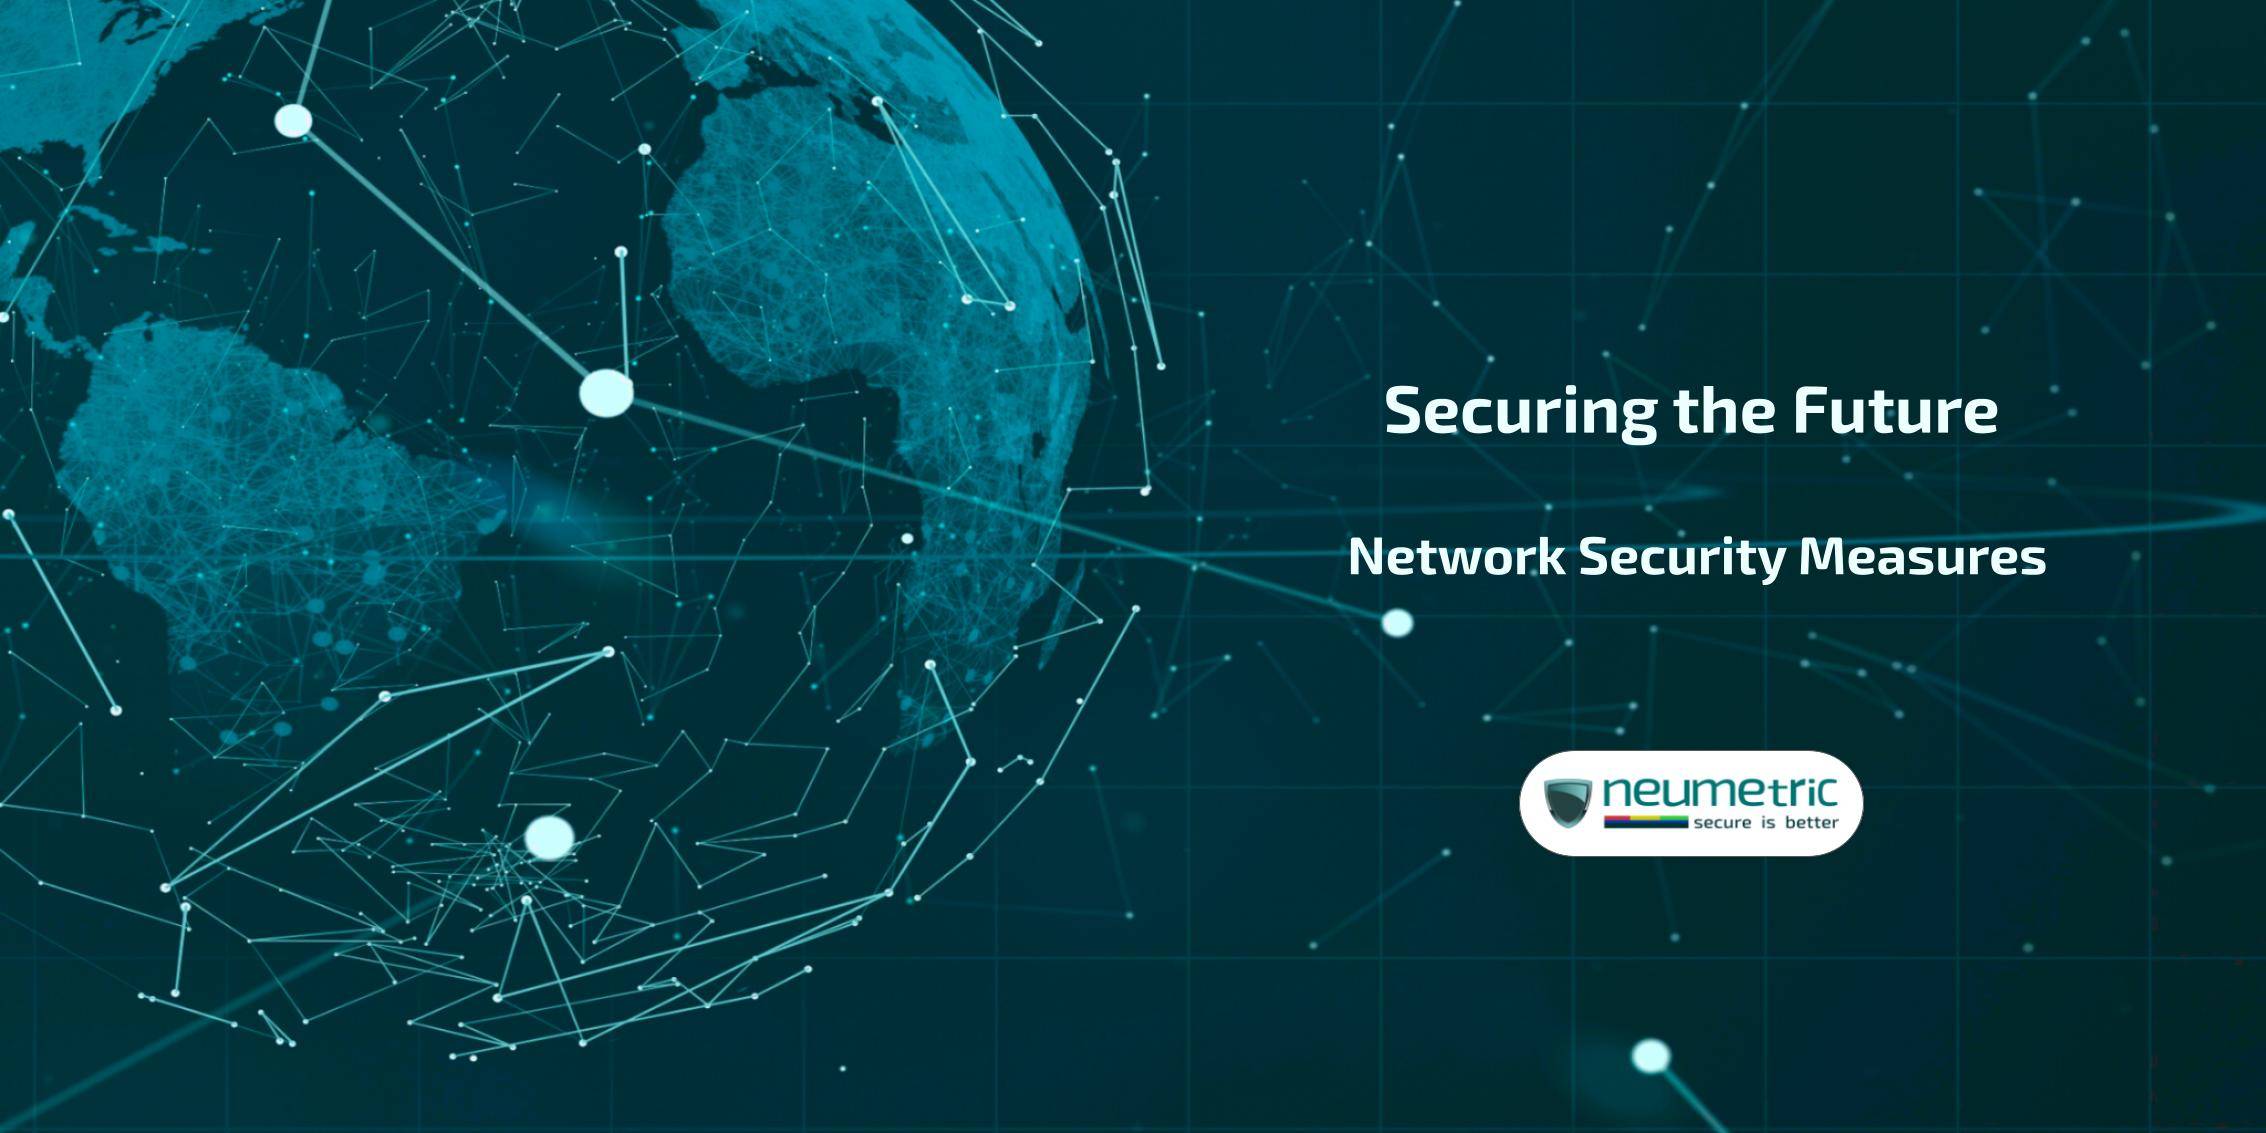 Securing the Future: Network Security Measures